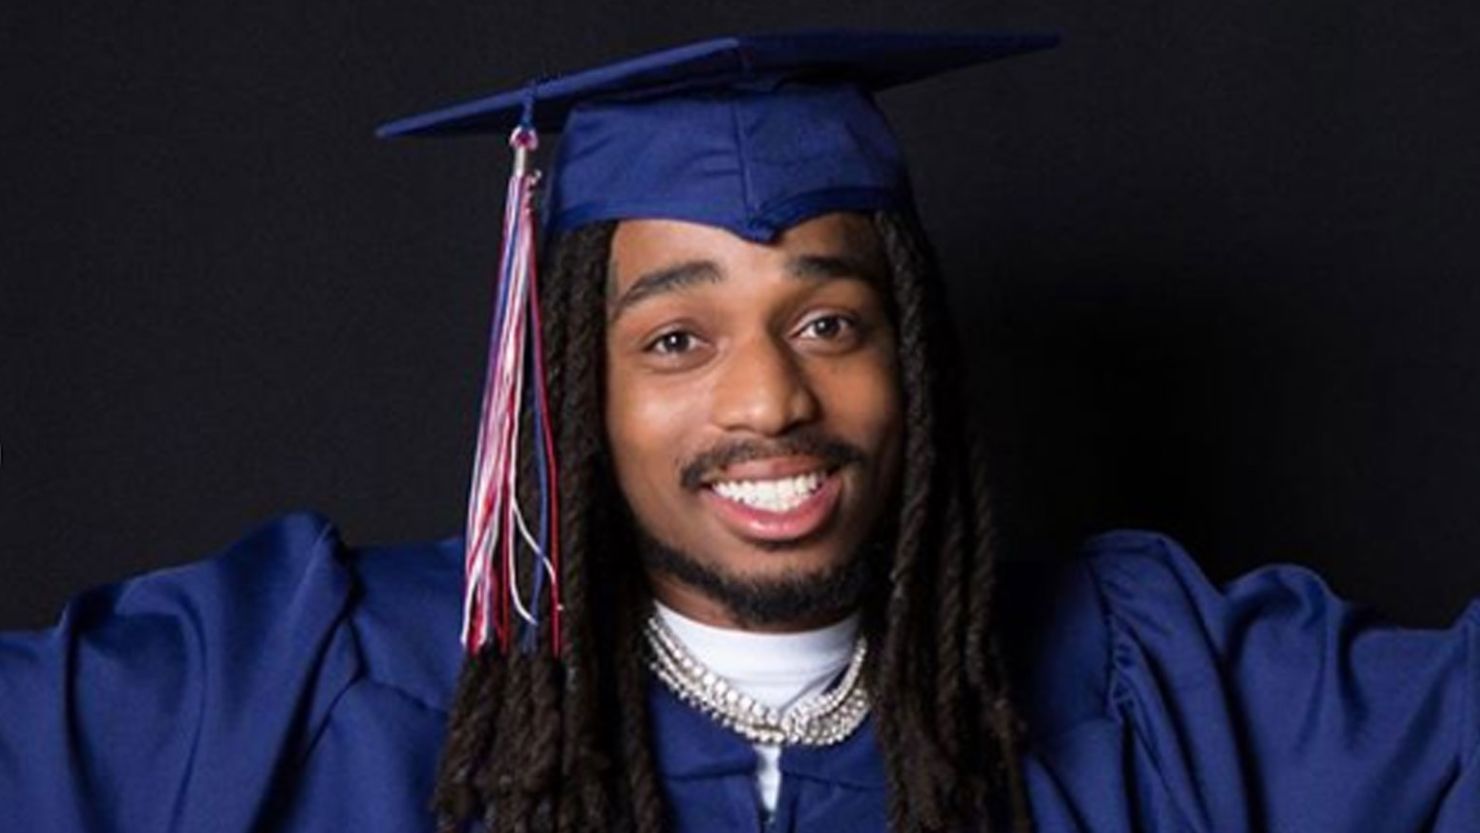 MIgos rapper Quavo announced he's joining the graduating class of 2020 at the age of 29